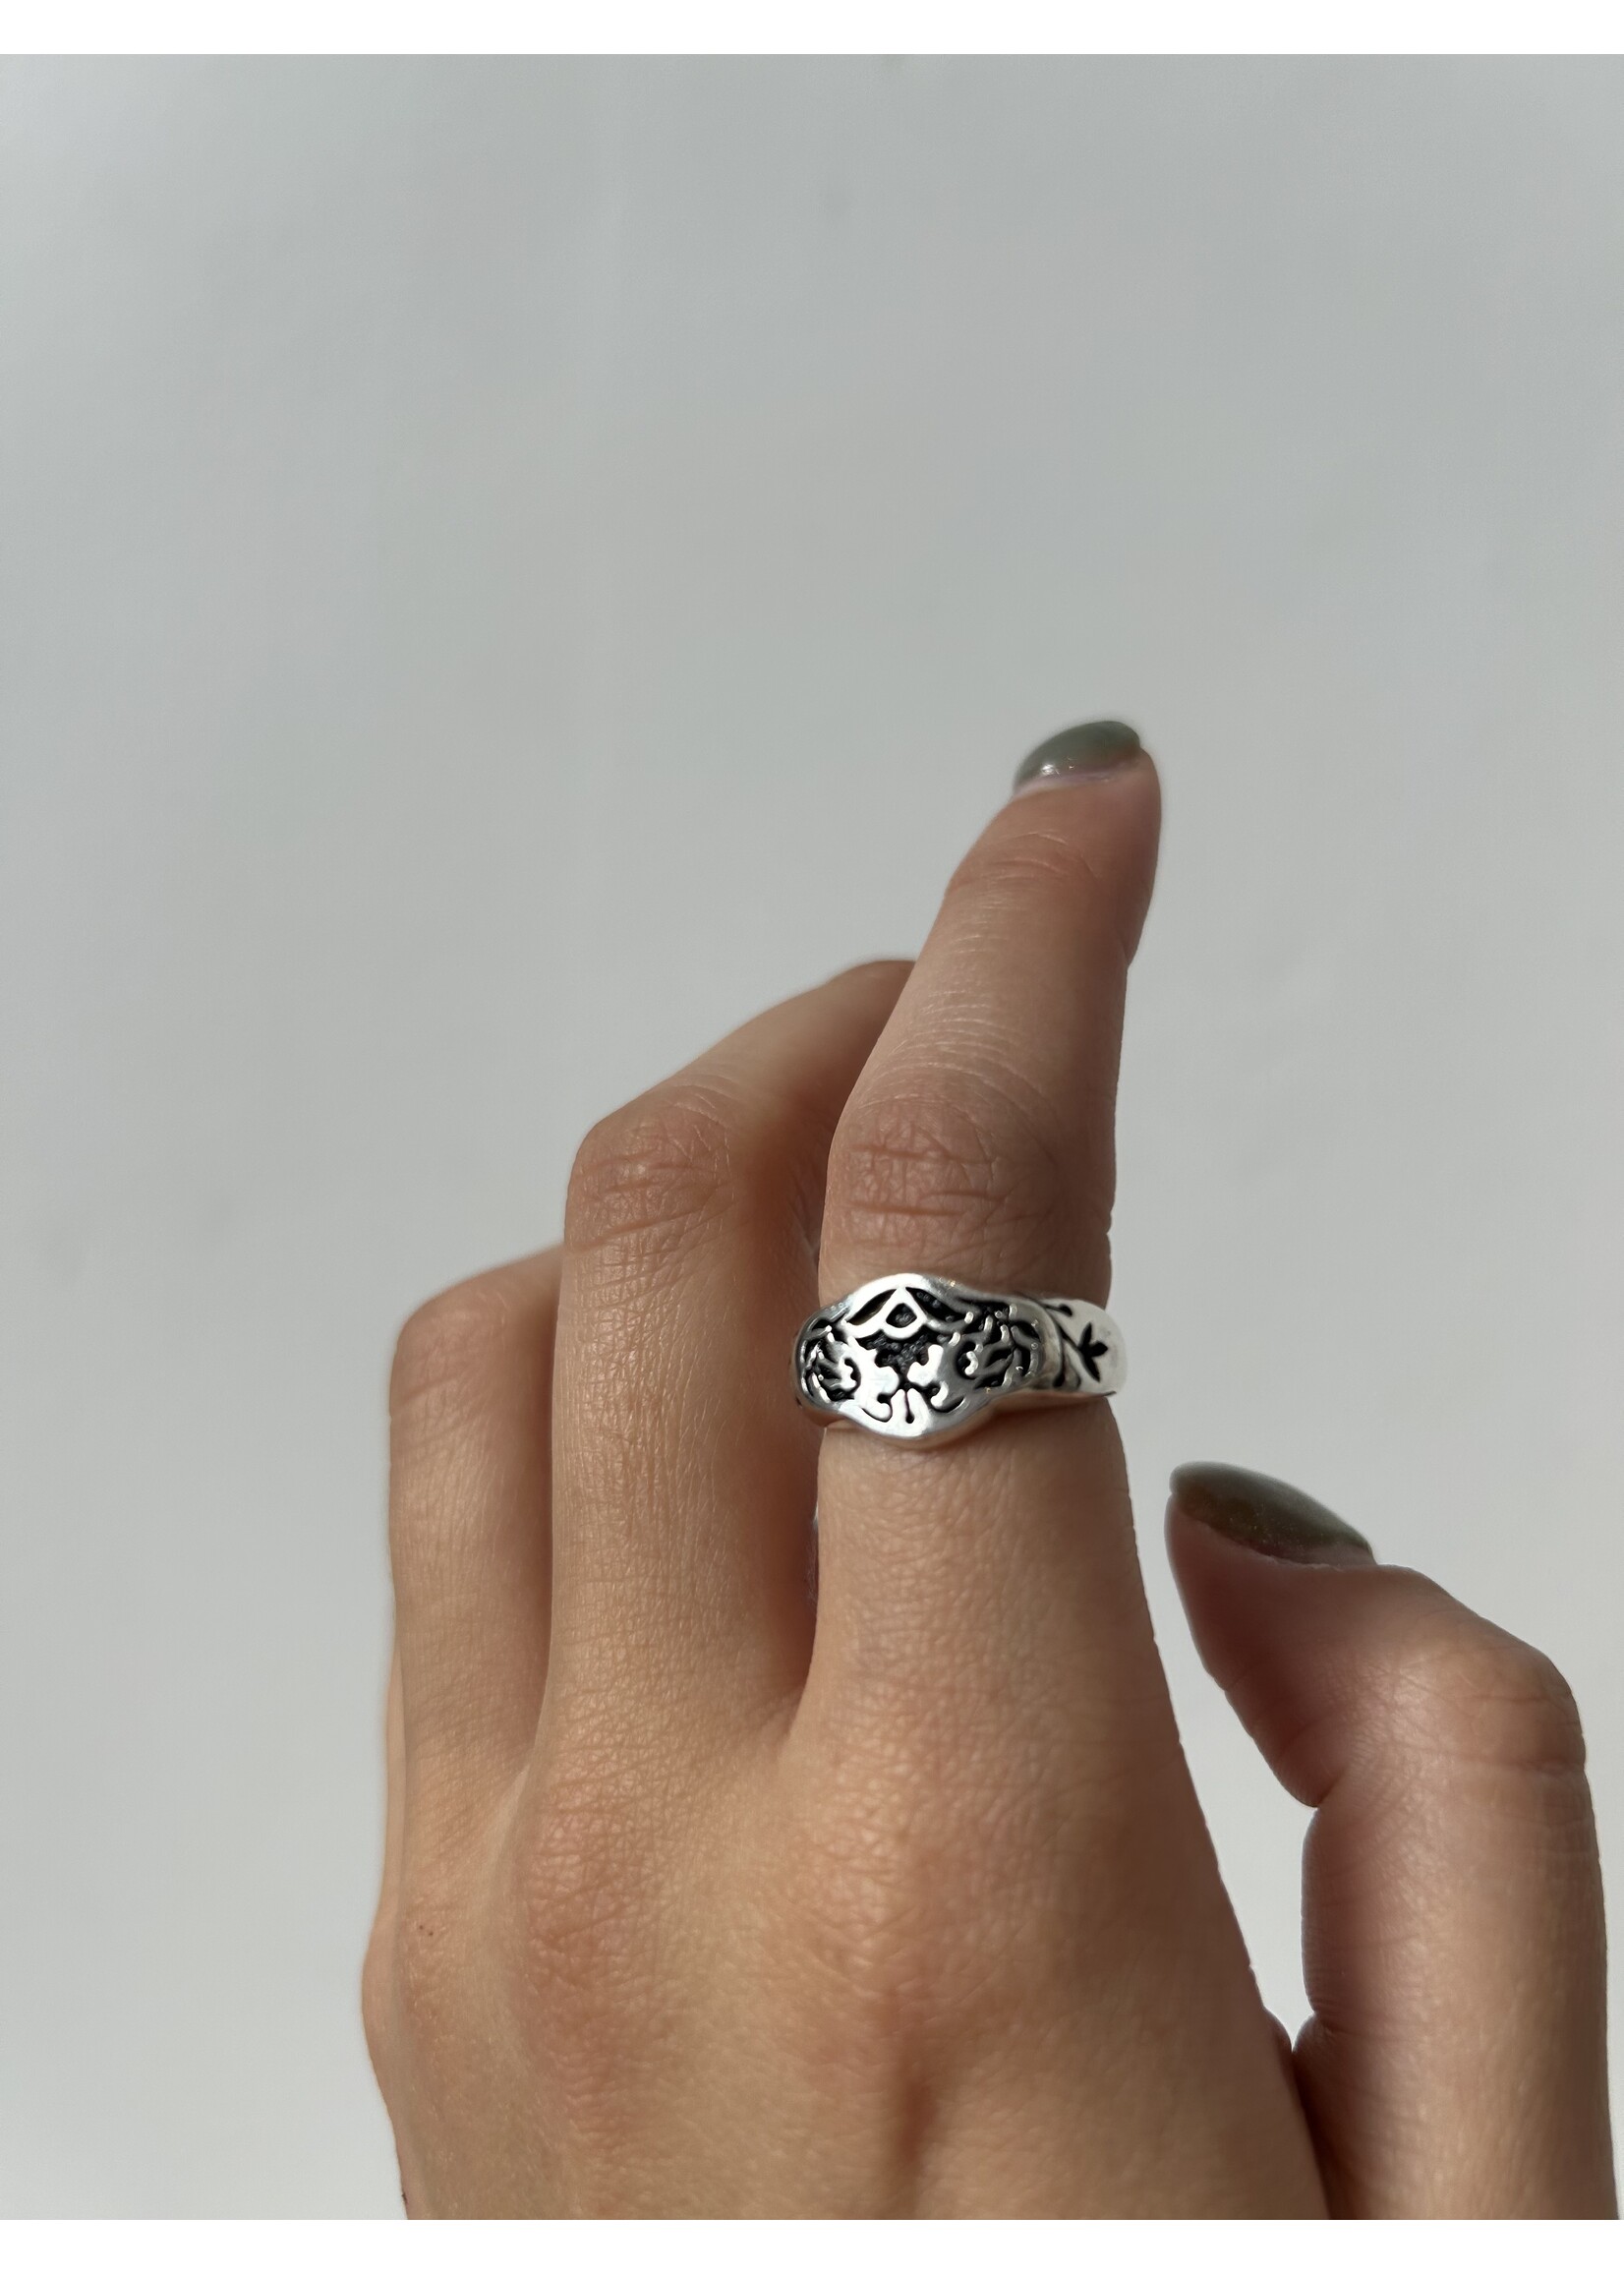 Hunt of Hounds Ring "Keep Growing" in sterling silver by HUNT OF HOUNDS